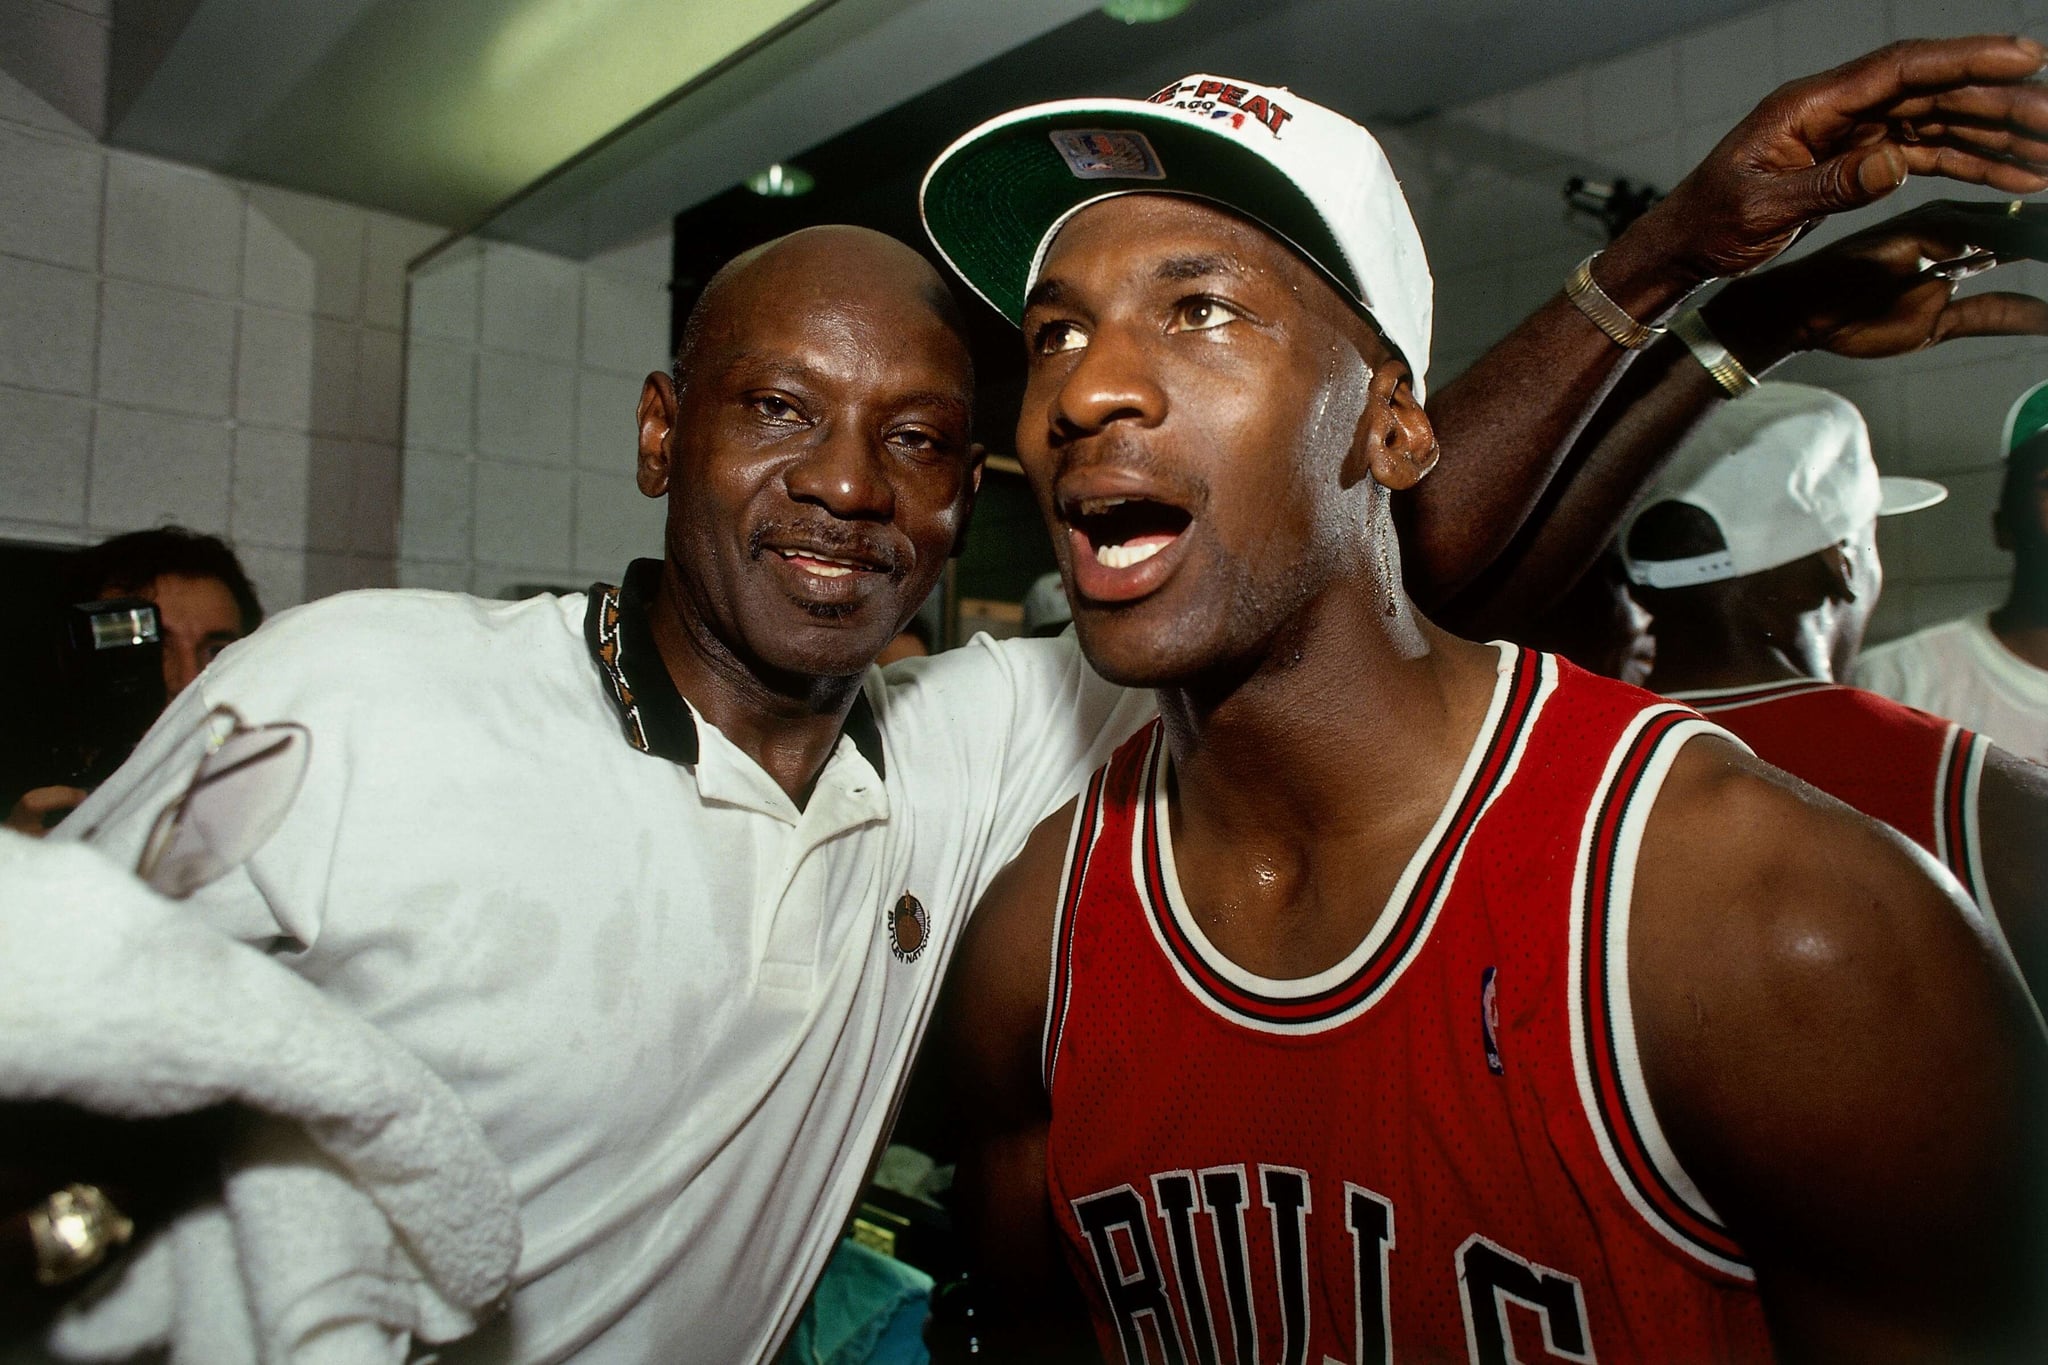 PHOENIX - JUNE 20:  Michael Jordan #23 of the Chicago Bulls celebrates winning the NBA Championship with his father after Game Six of the 1993 NBA Finals on June 20, 1993 at th America West Arena in Phoenix, Arizona.  The Bulls won 99-98.  NOTE TO USER: User expressly acknowledges and agrees that, by downloading and/or using this Photograph, user is consenting to the terms and conditions of the Getty Images Licence Agreement. Mandatory Copyright Notice: Copyright 1993 NBAE  (Photo by Andrew D. Bernstein/NBAE via Getty Images)